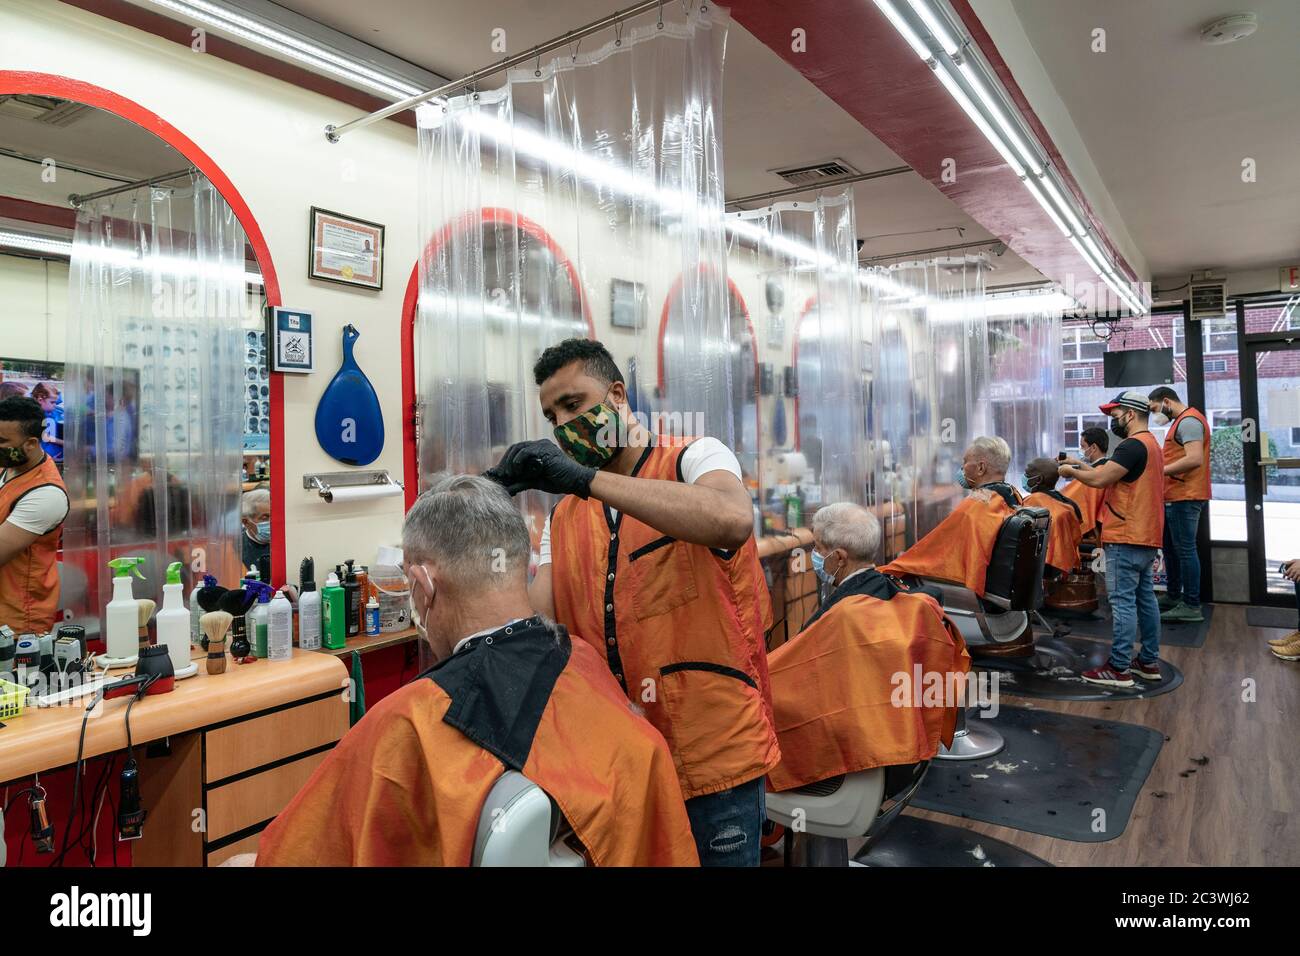 New York, NY - June 22, 2020: Barbershops in the Bronx started to serve customers and perform haircuts as New York City enters phase 2 of reopening Stock Photo